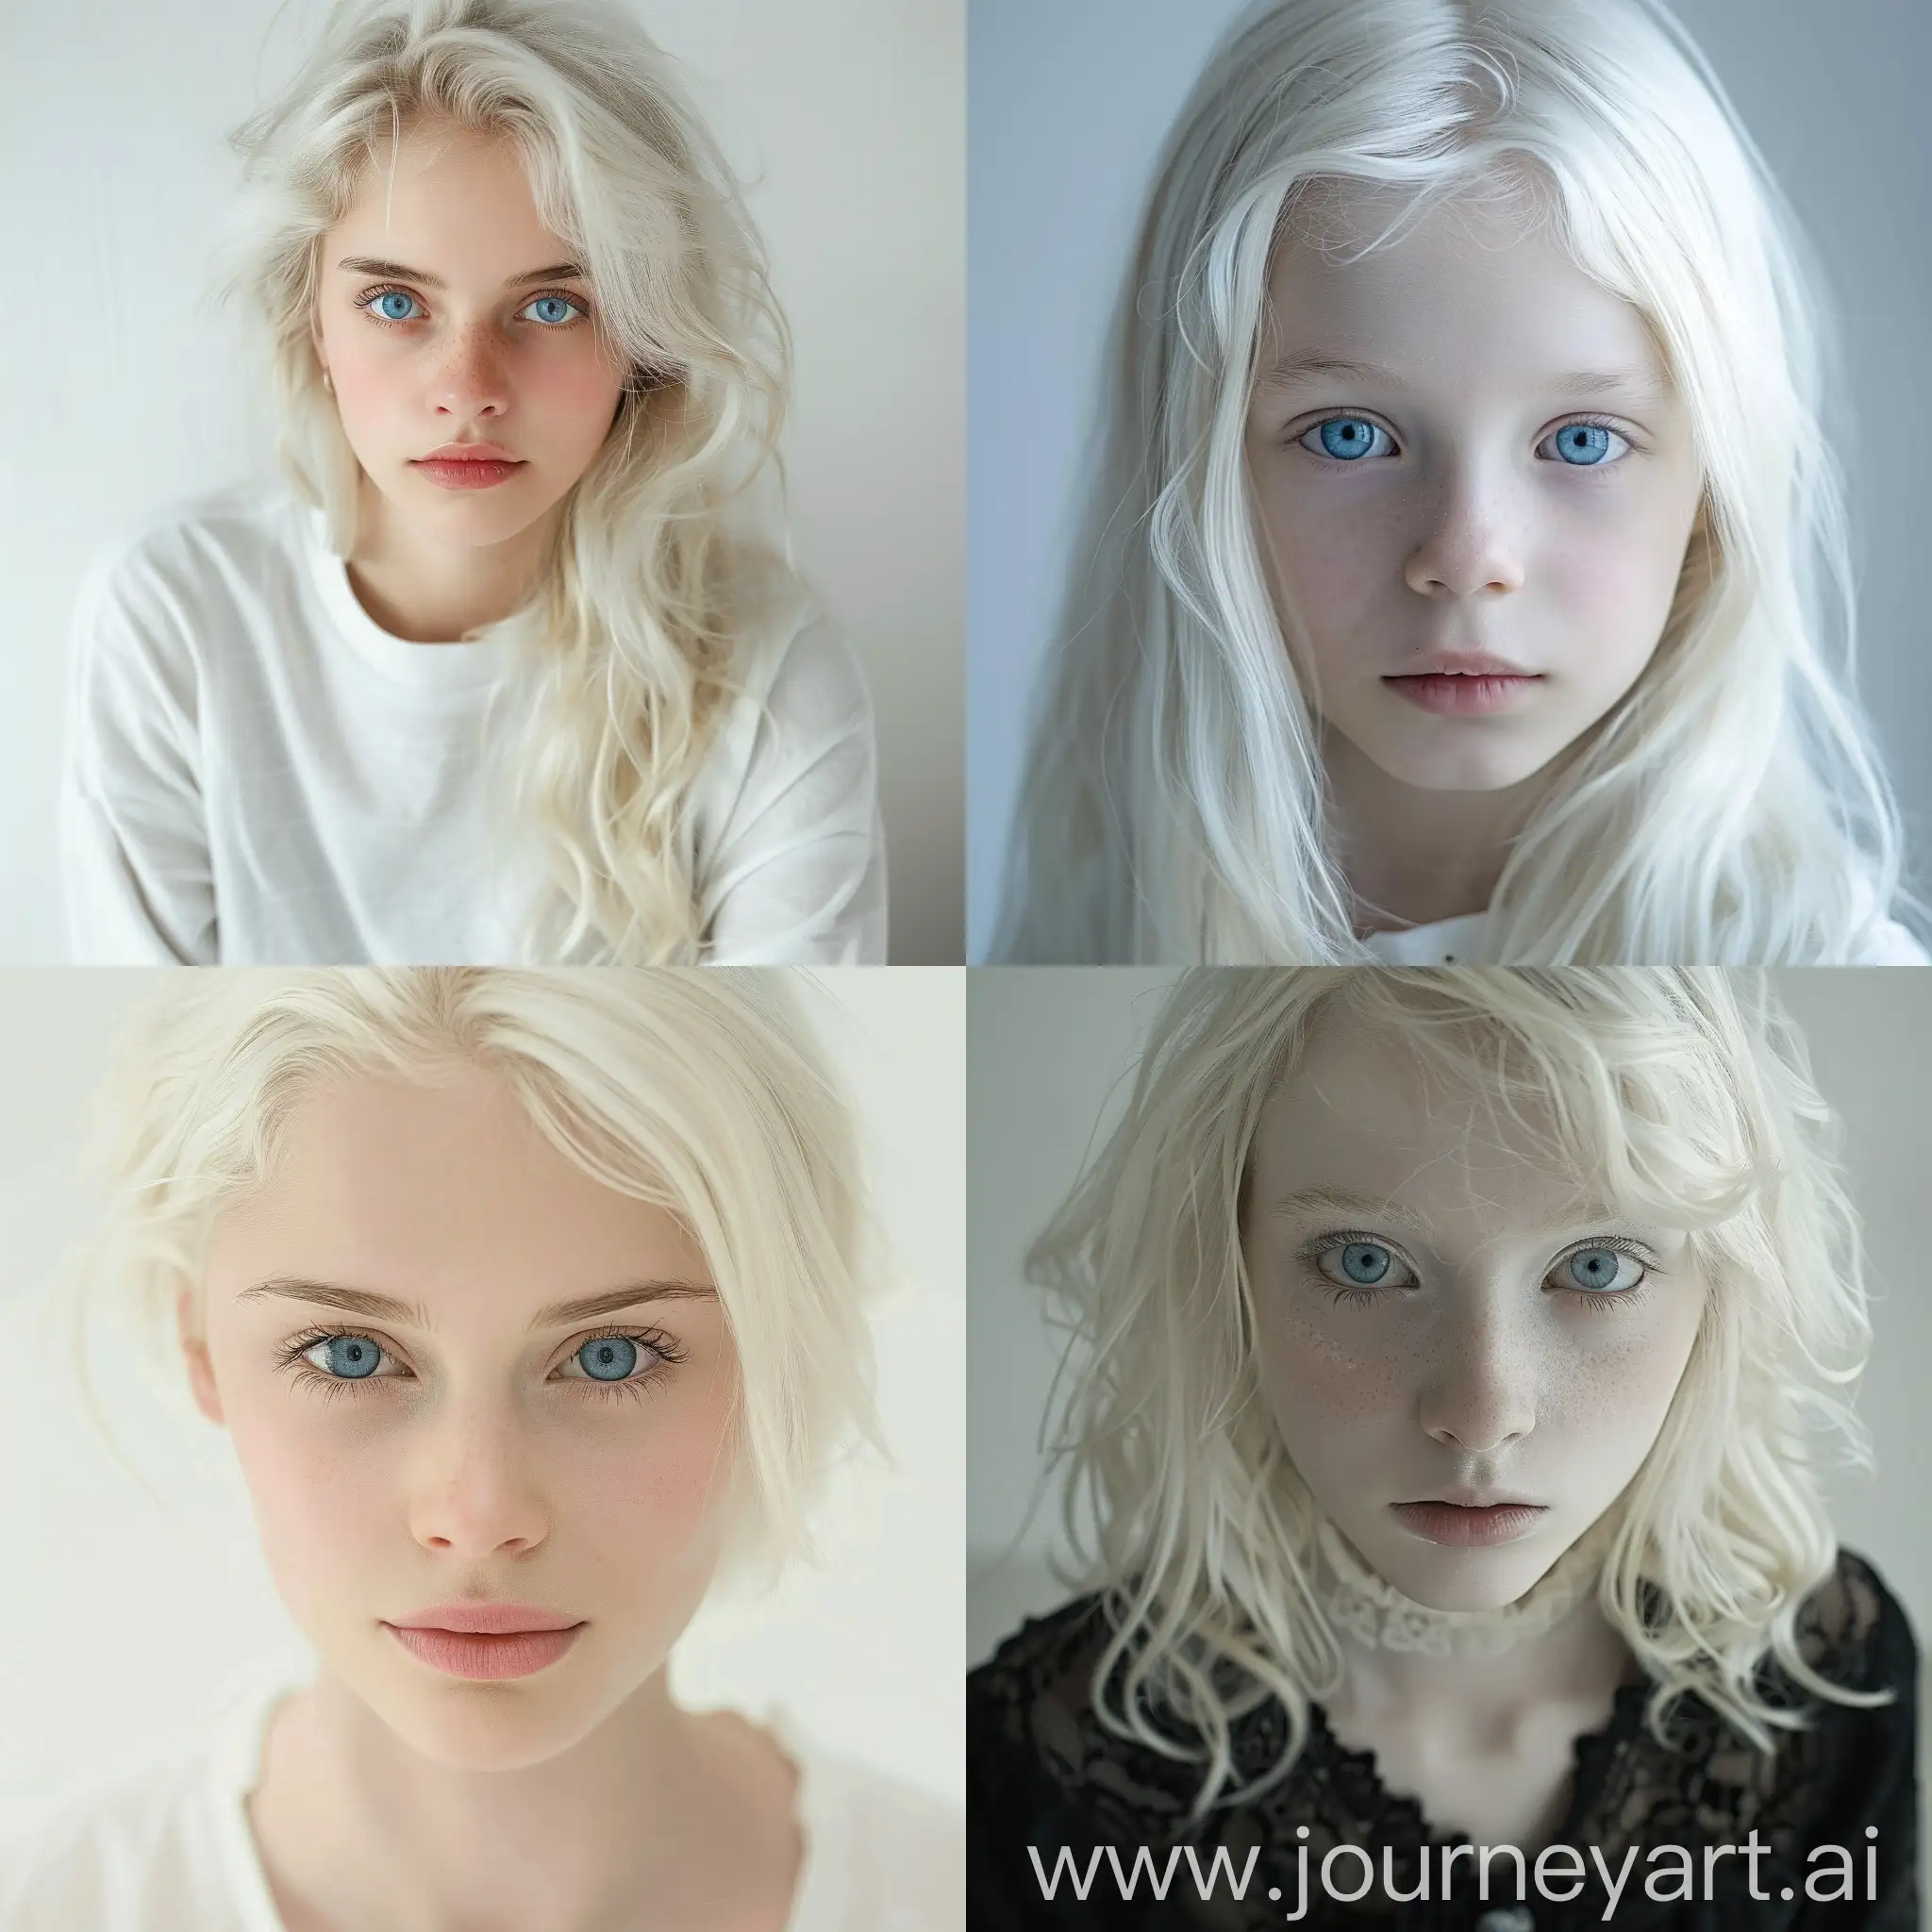 Beautiful German blonde girl with blue eyes and extremely white and pale skin